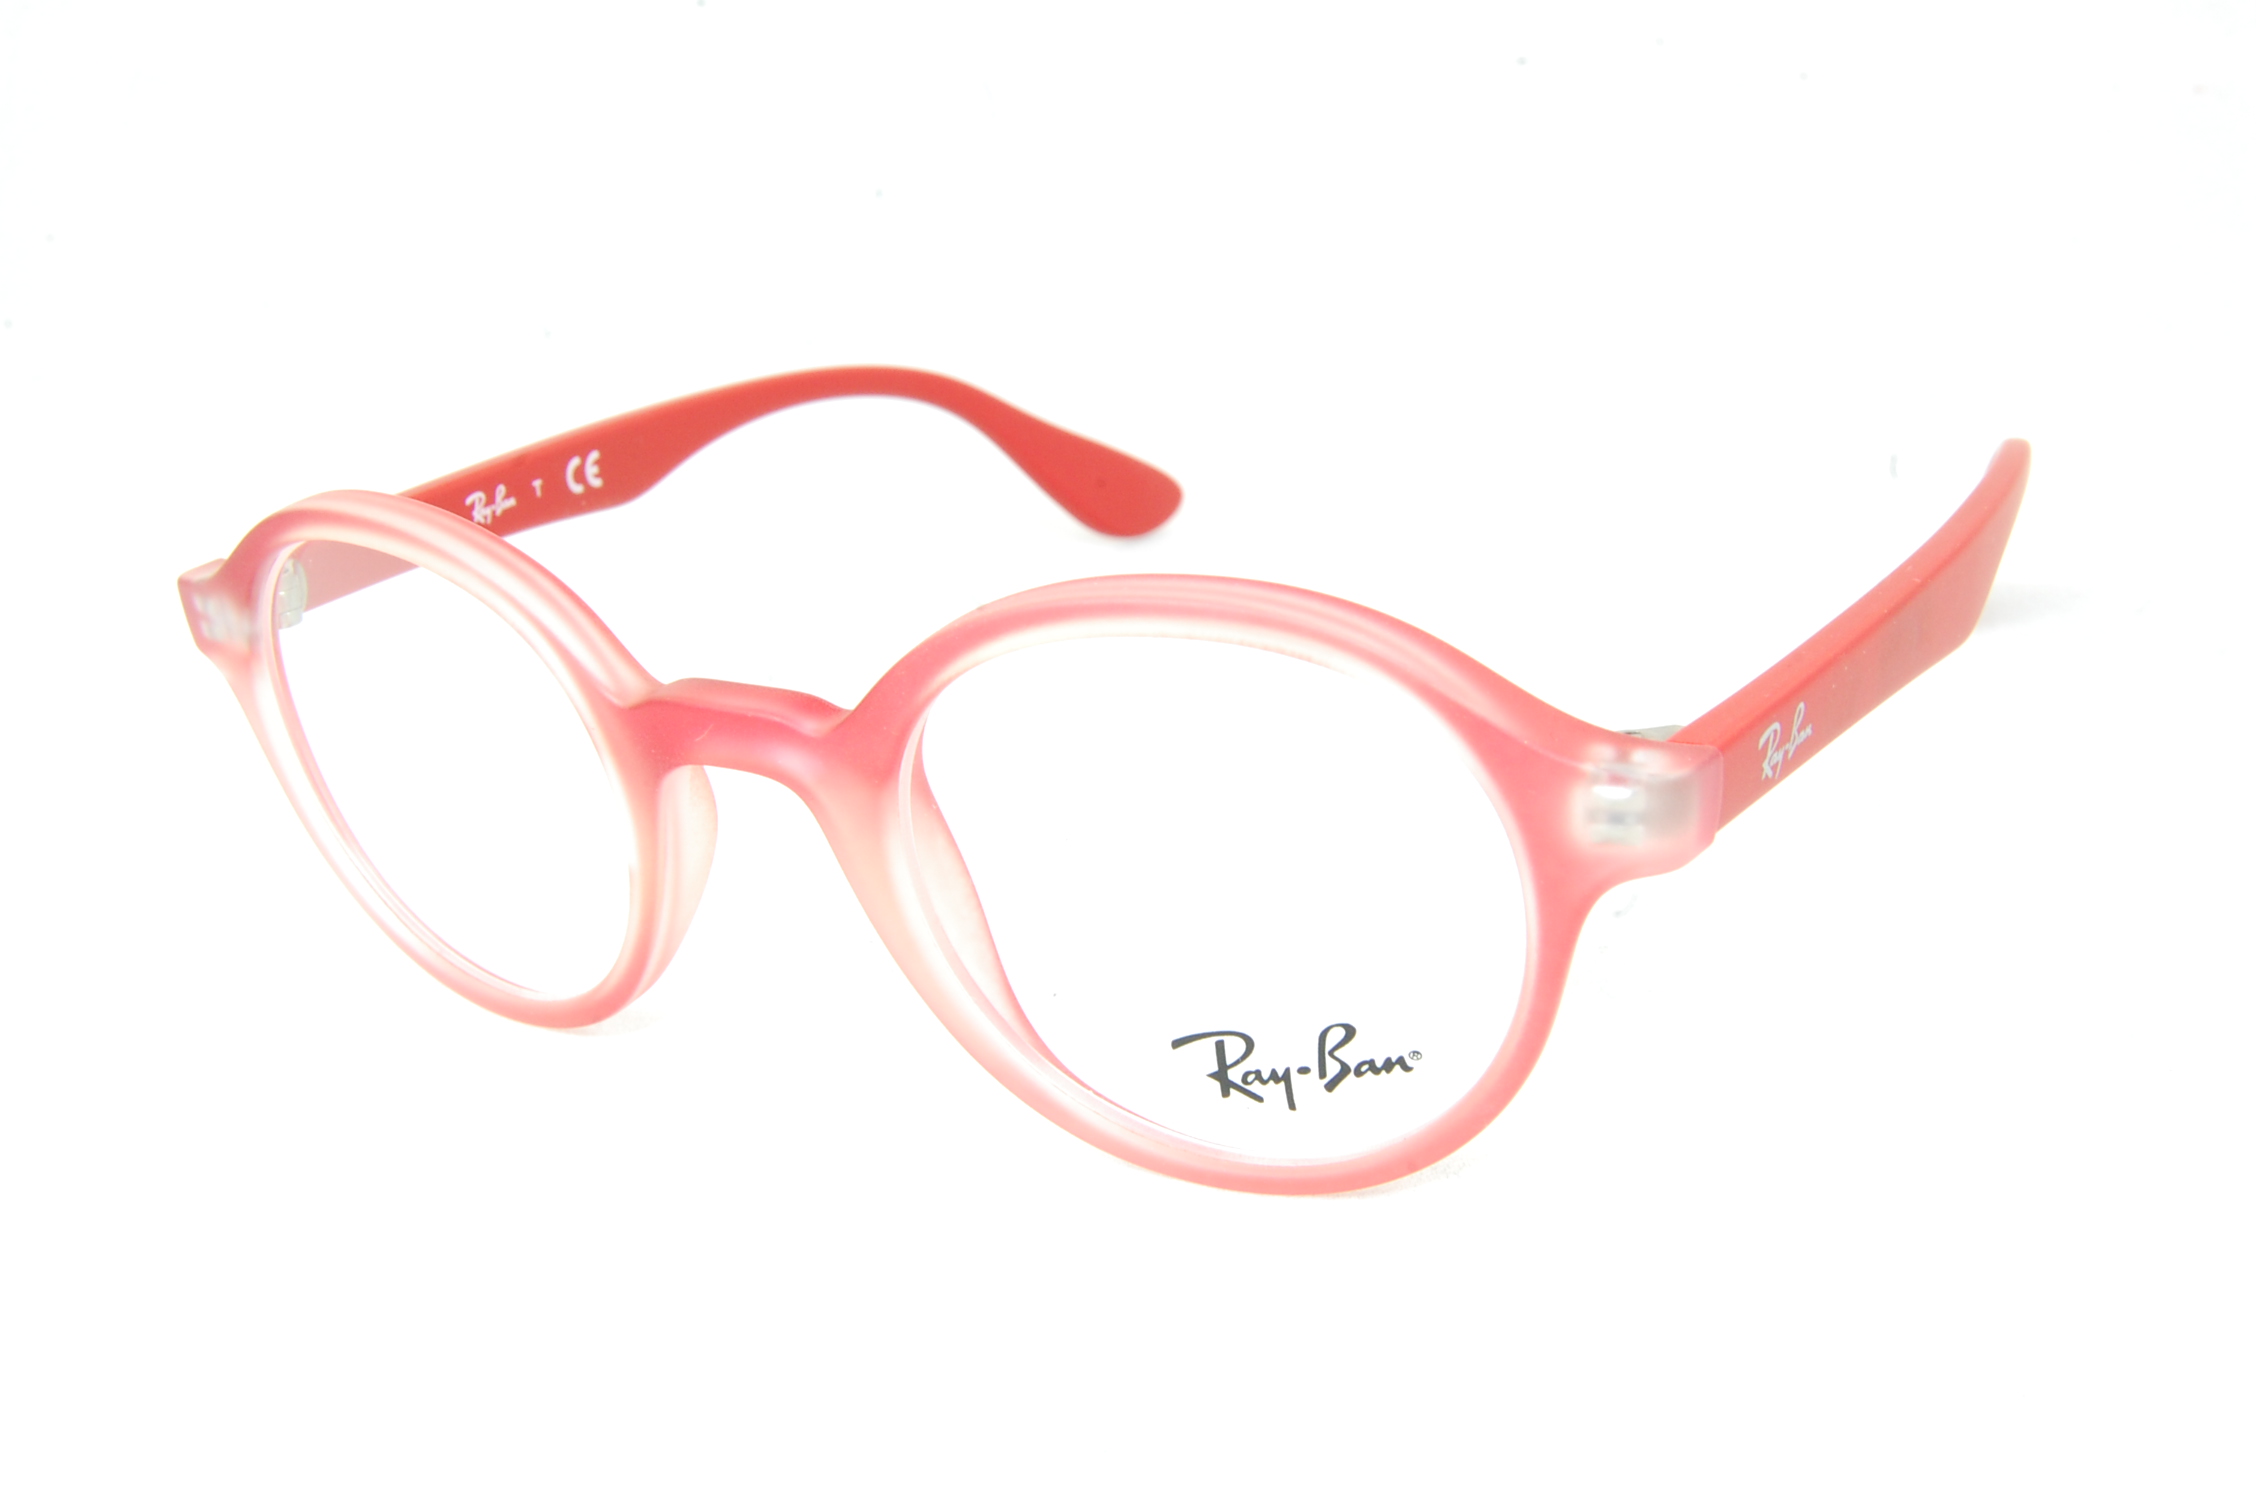 RAY-BAN OPTIQUE 10/10 FACHES THUMESNIL